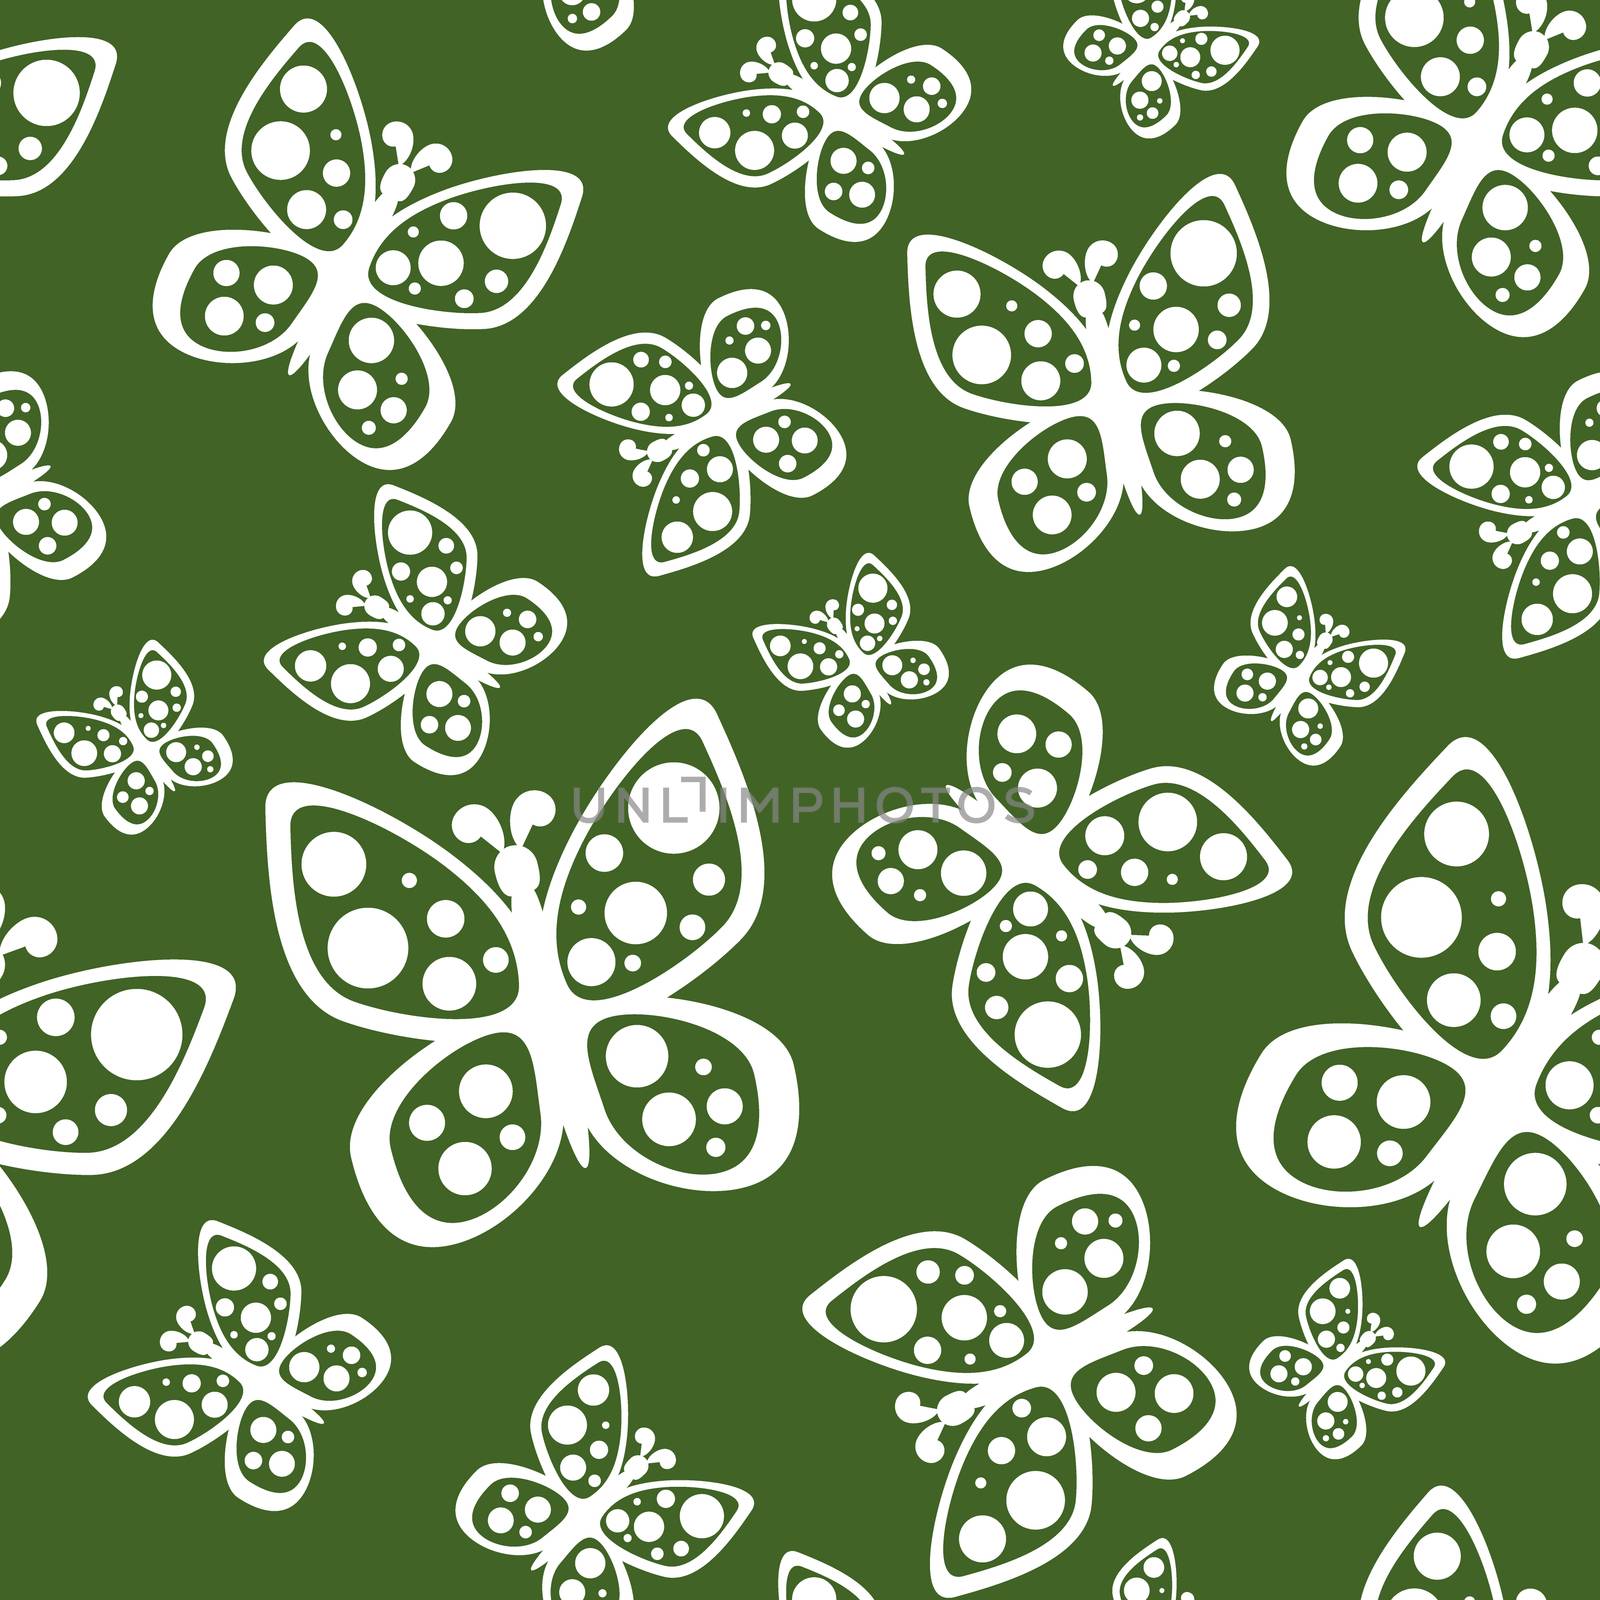 Beautiful summer seamless background of butterflies green and white colors.